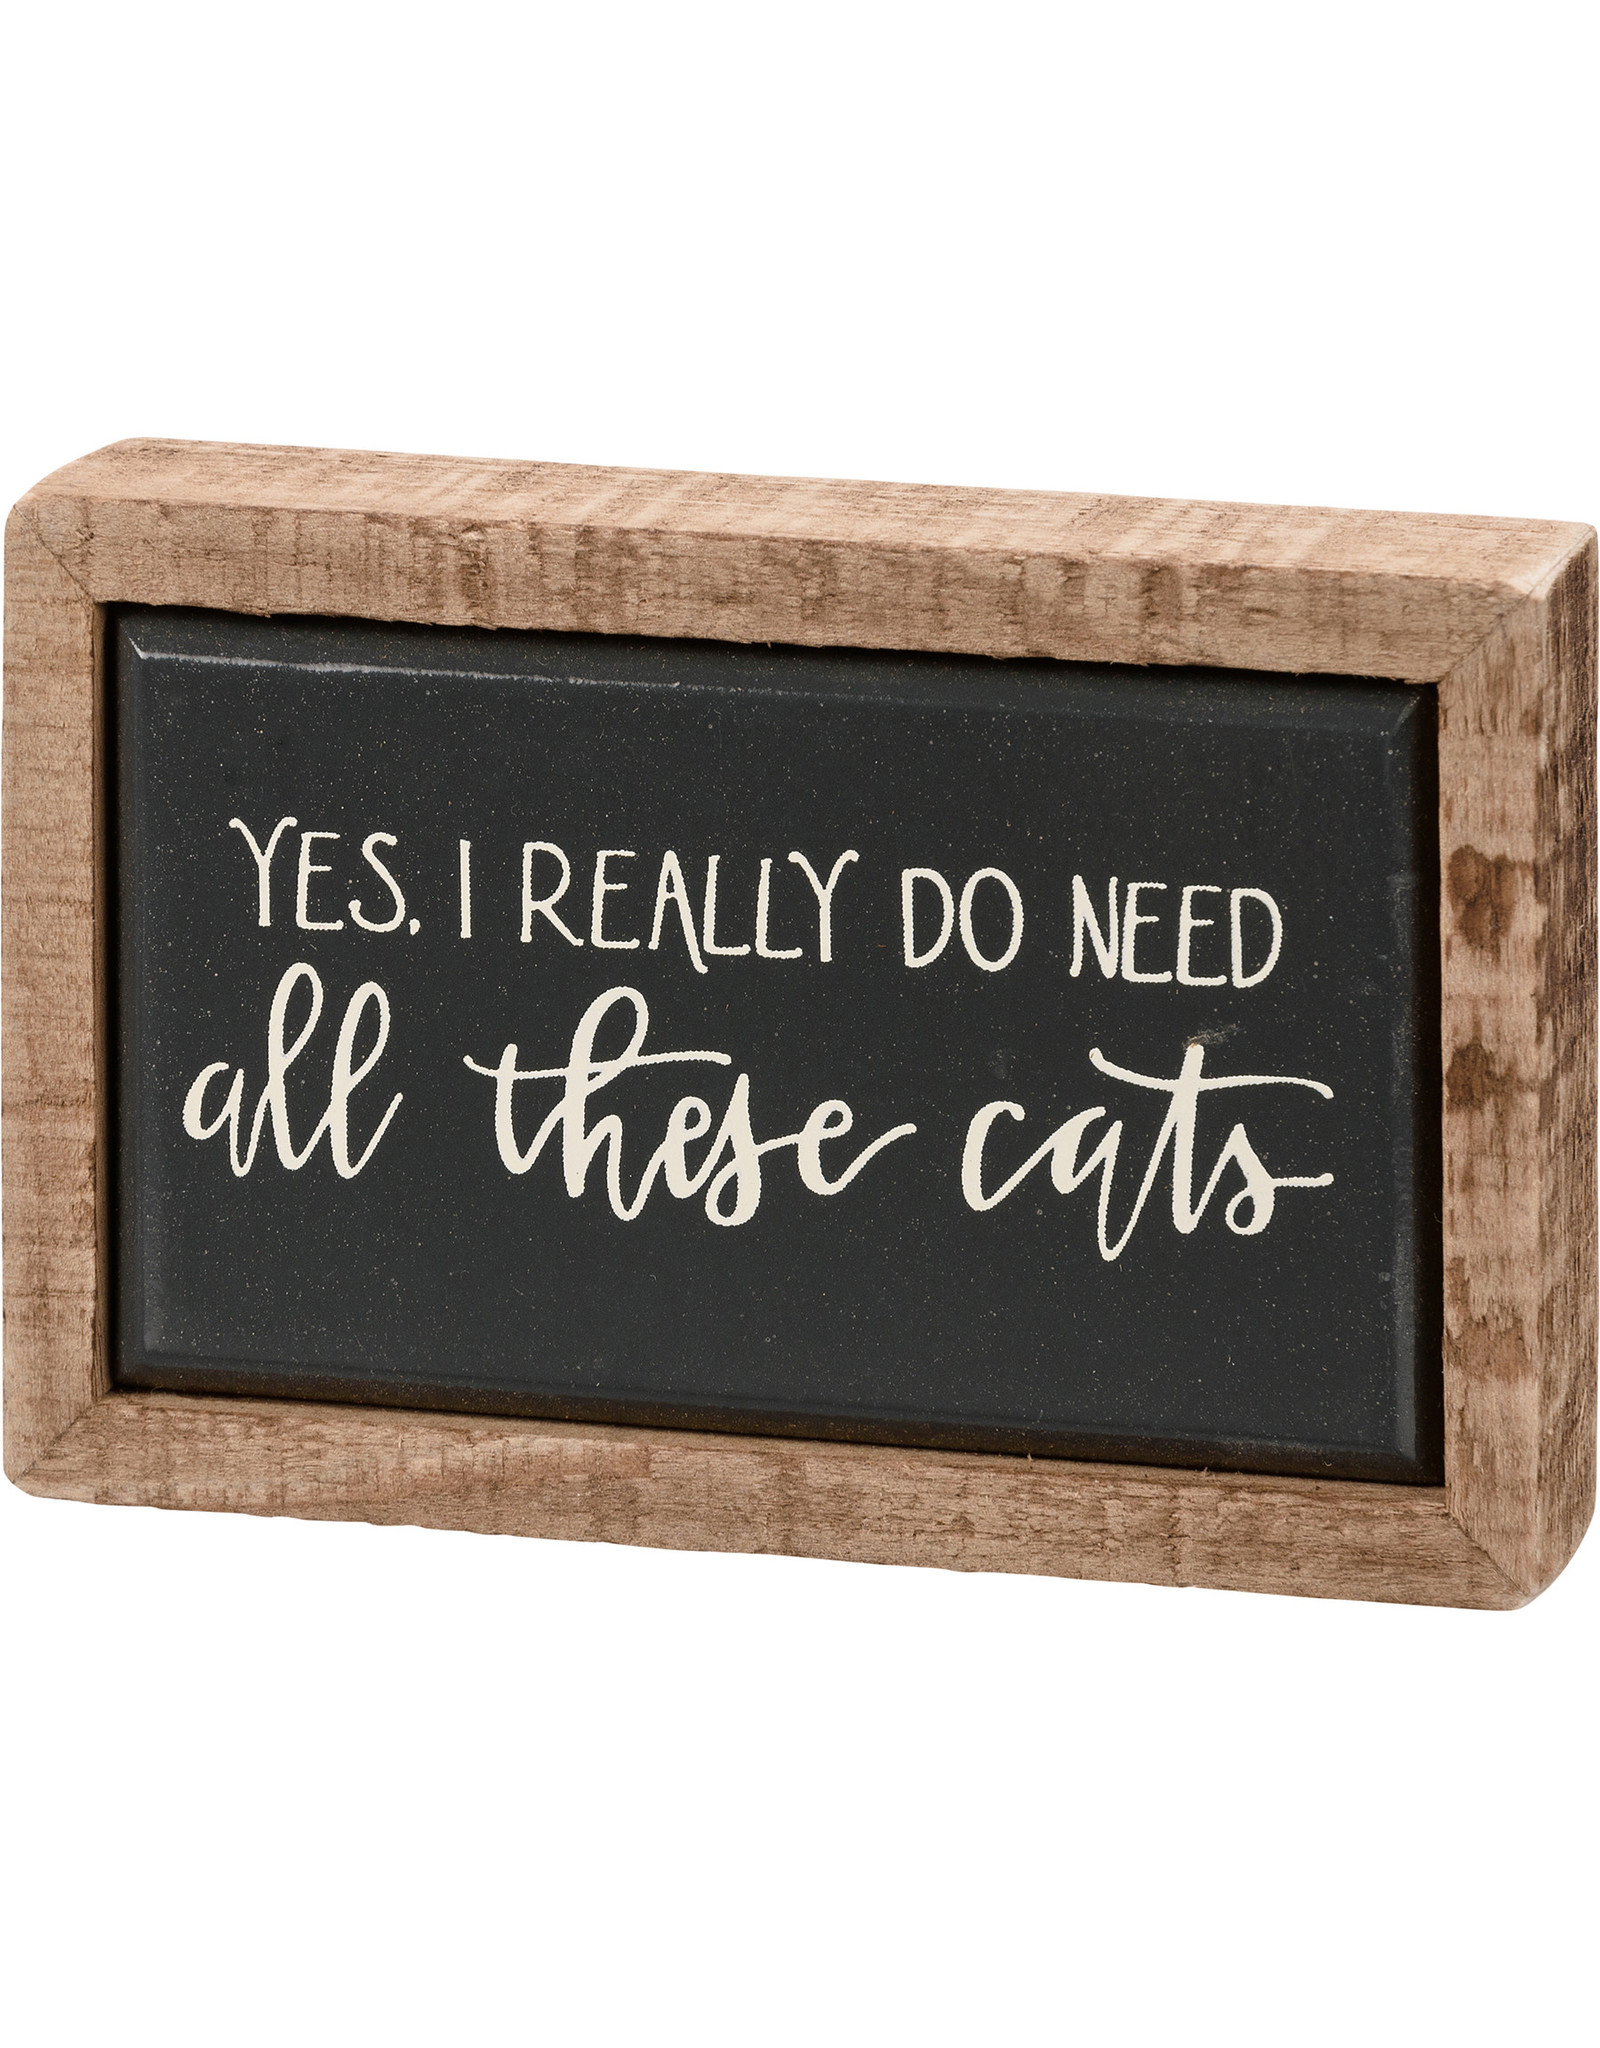 PRIMITIVES BY KATHY PET LOVER BLOCK SIGNS REALLY DO NEED ALL THESE CATS MINI